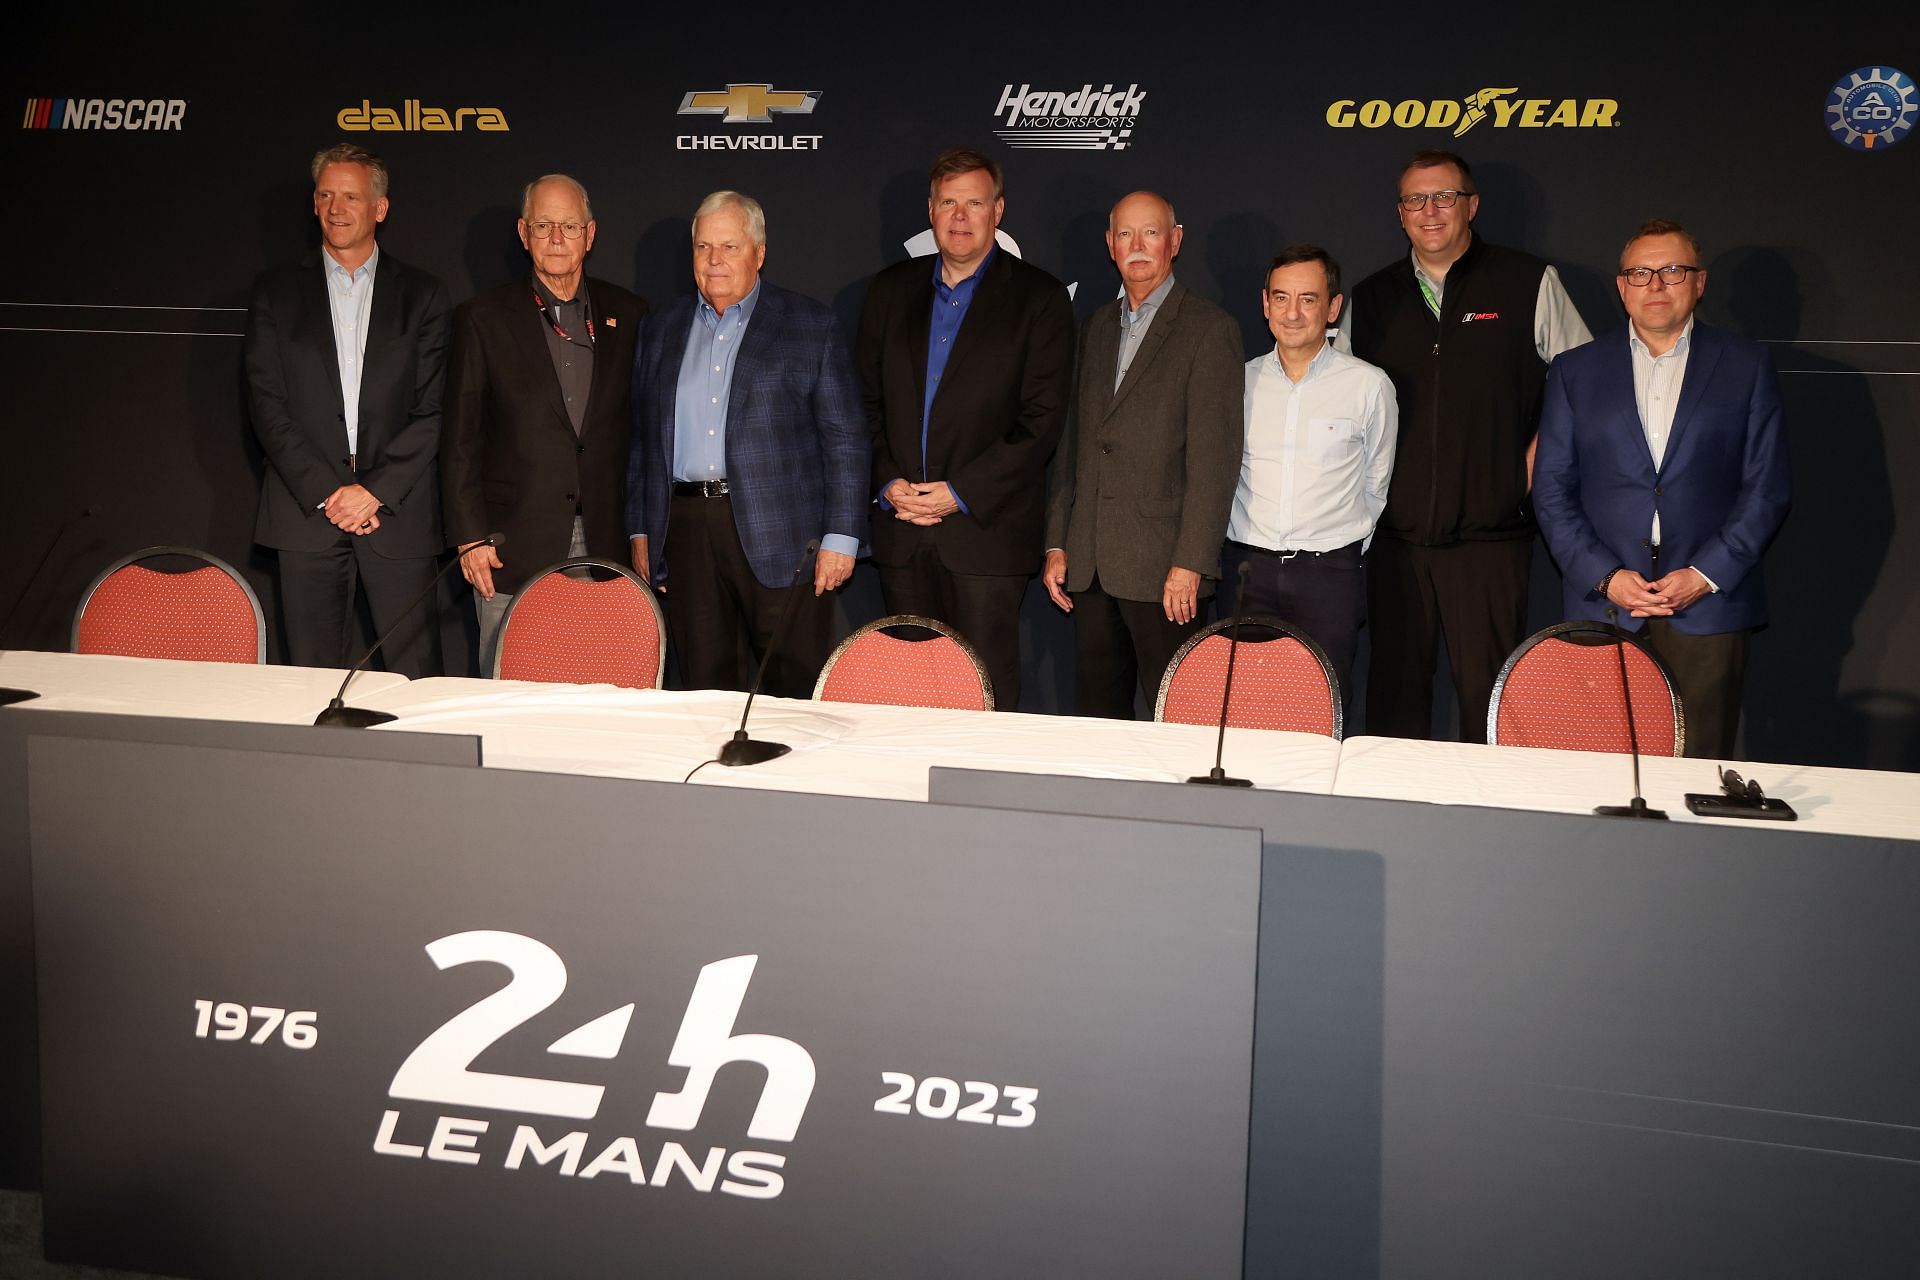 NASCAR and Hendrick Motorsports 24 Hours of Le Mans Announcement